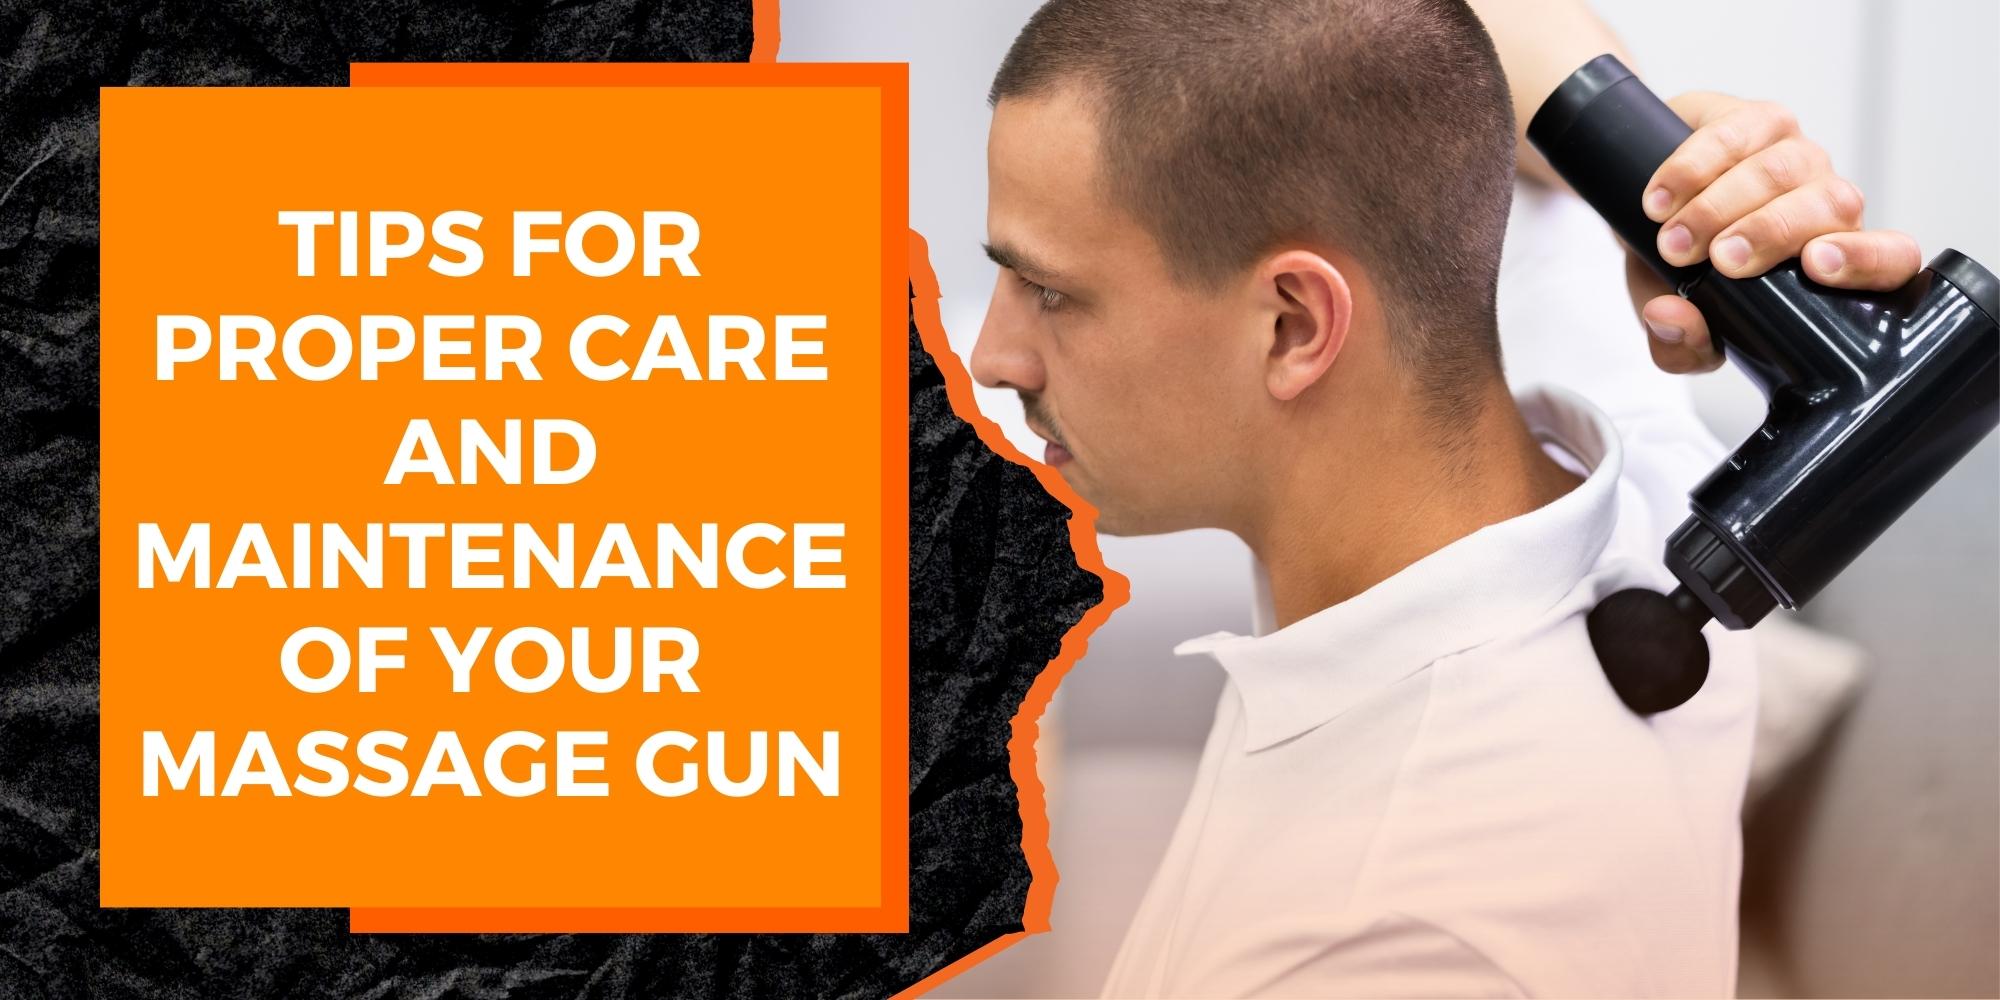 Tips for Proper Care and Maintenance of Your Massage Gun